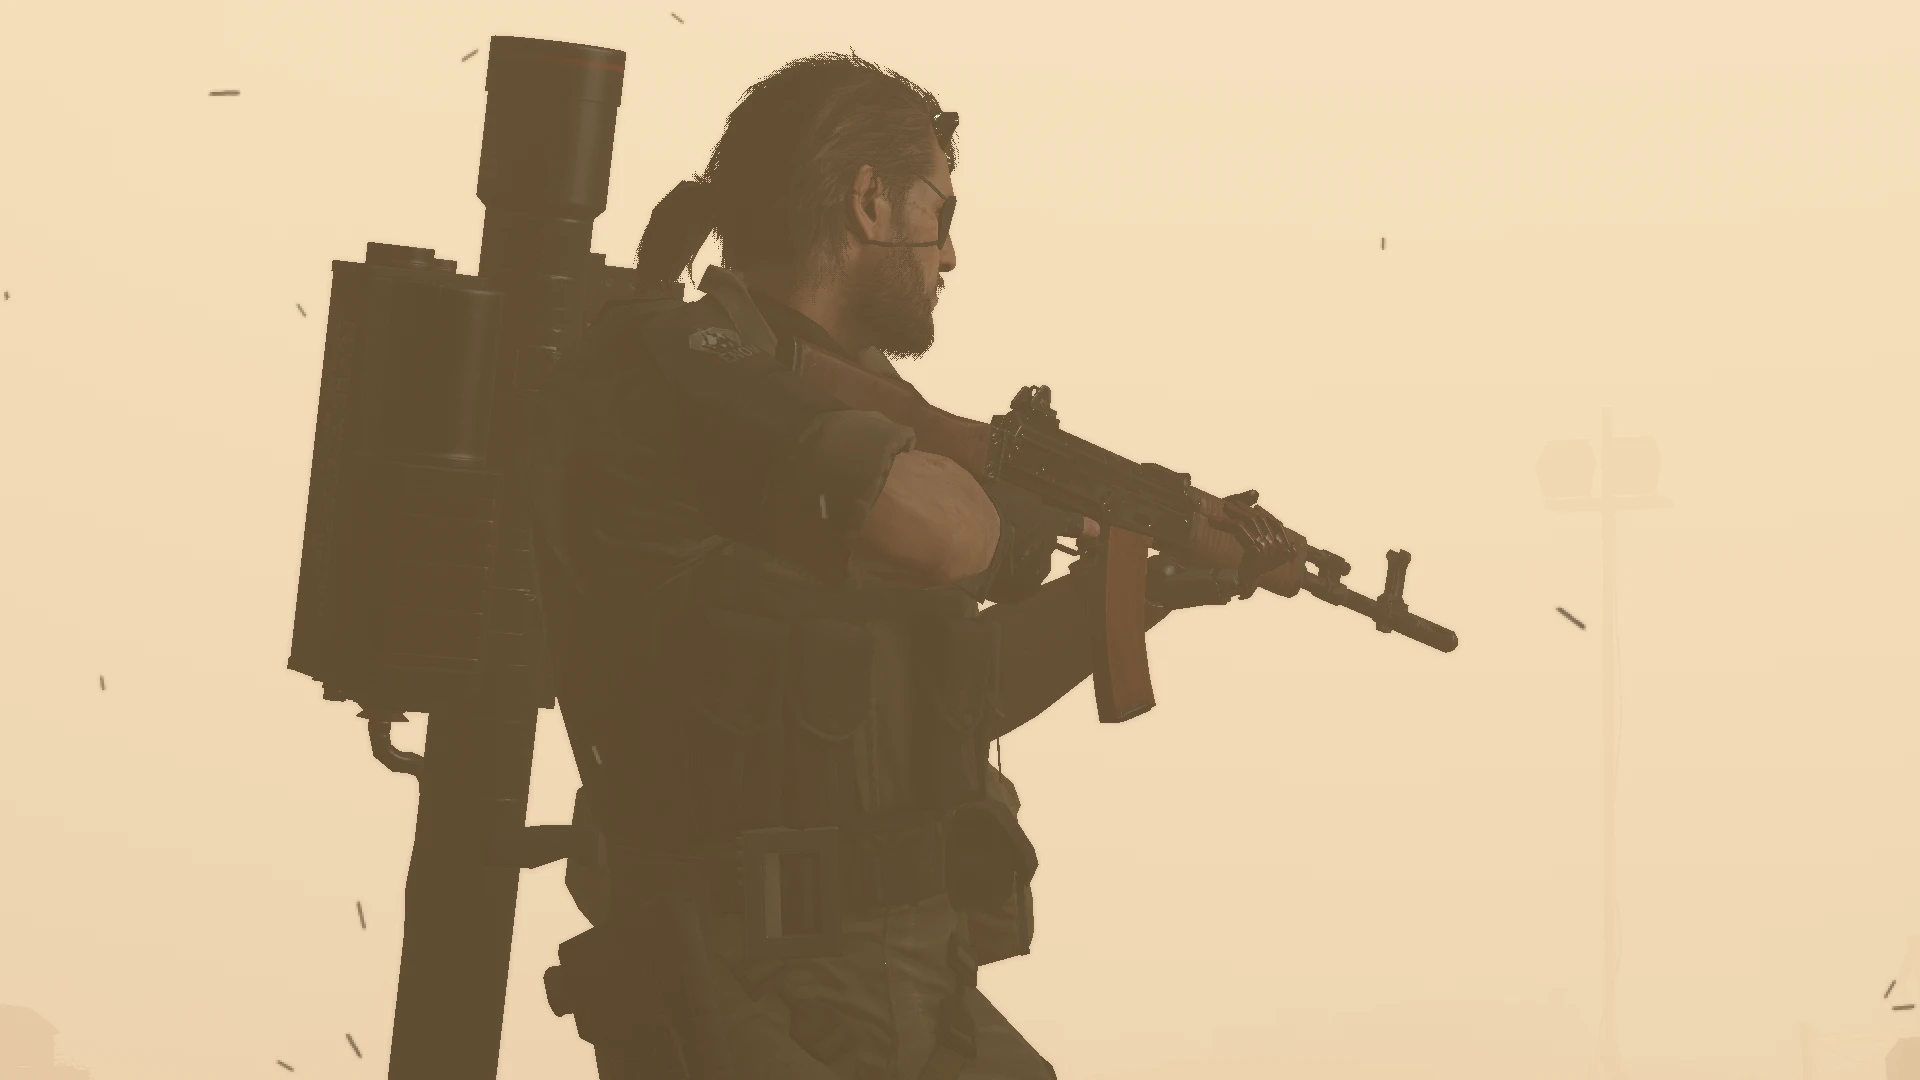 metal gear solid v the phantom pain weapons